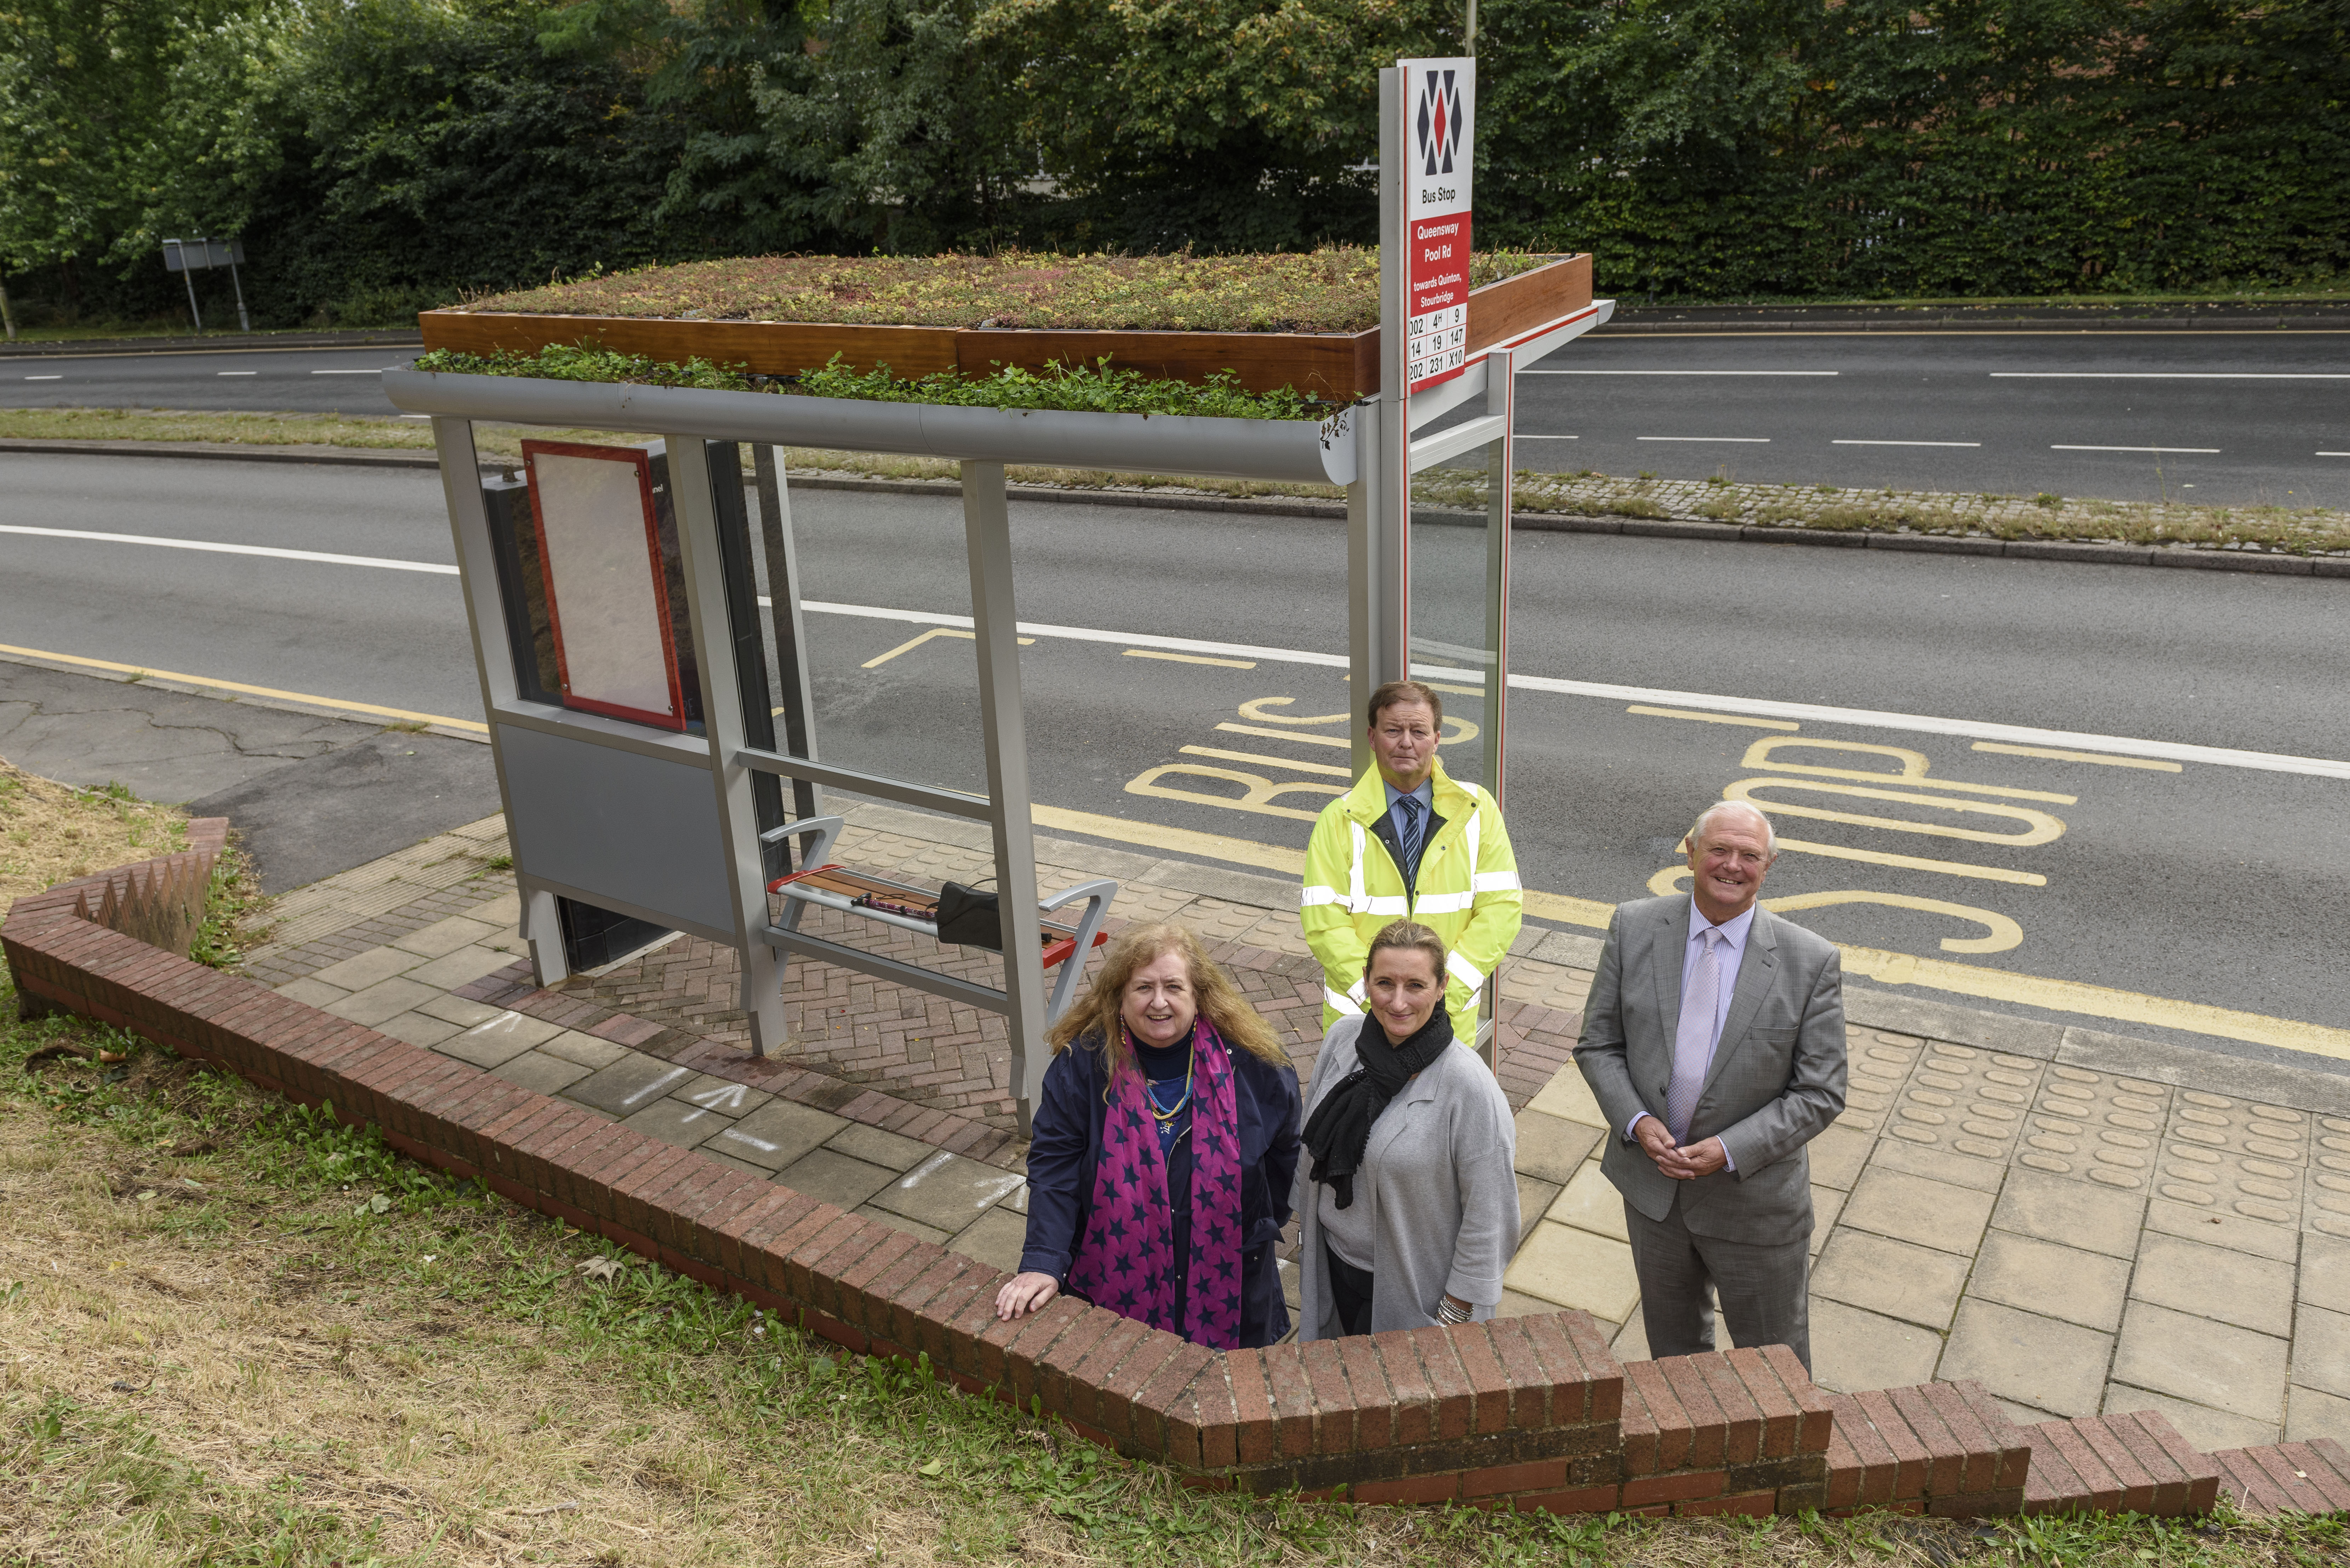 Cllr Kath Hartley (TfWM), Eve O'Connor (Halesowen In Bloom), Cllr Ian Kettle (Dudley Council) and behind Mark Purnell (BSL) welcome the new shelter